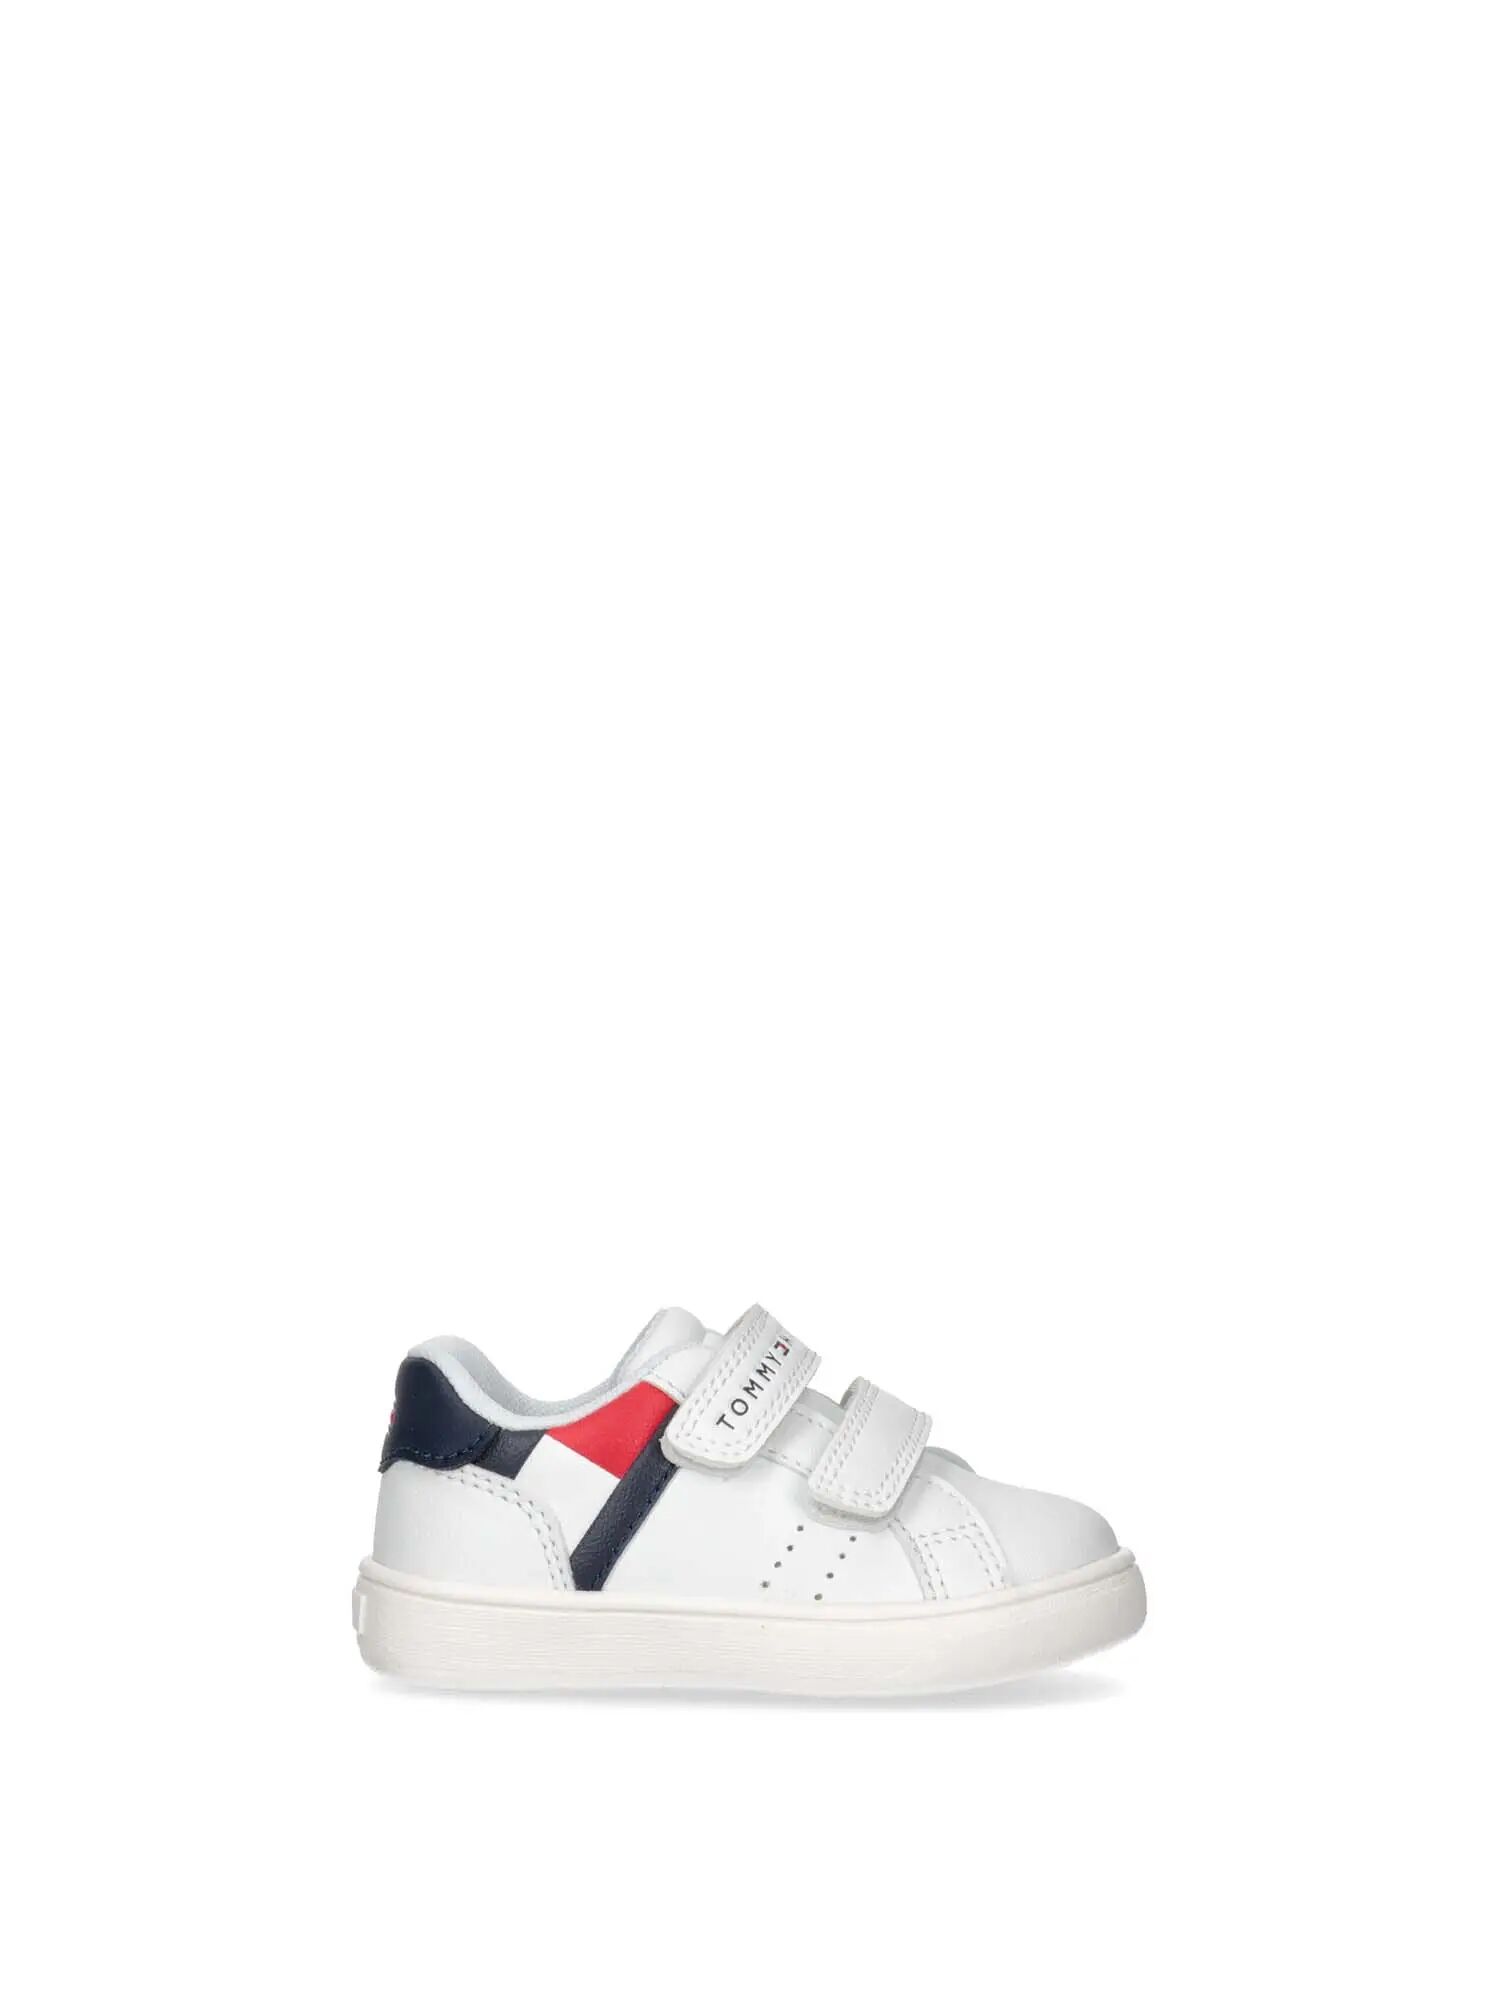 Tommy Hilfiger Sneakers Bianche Bambino BIANCO 28